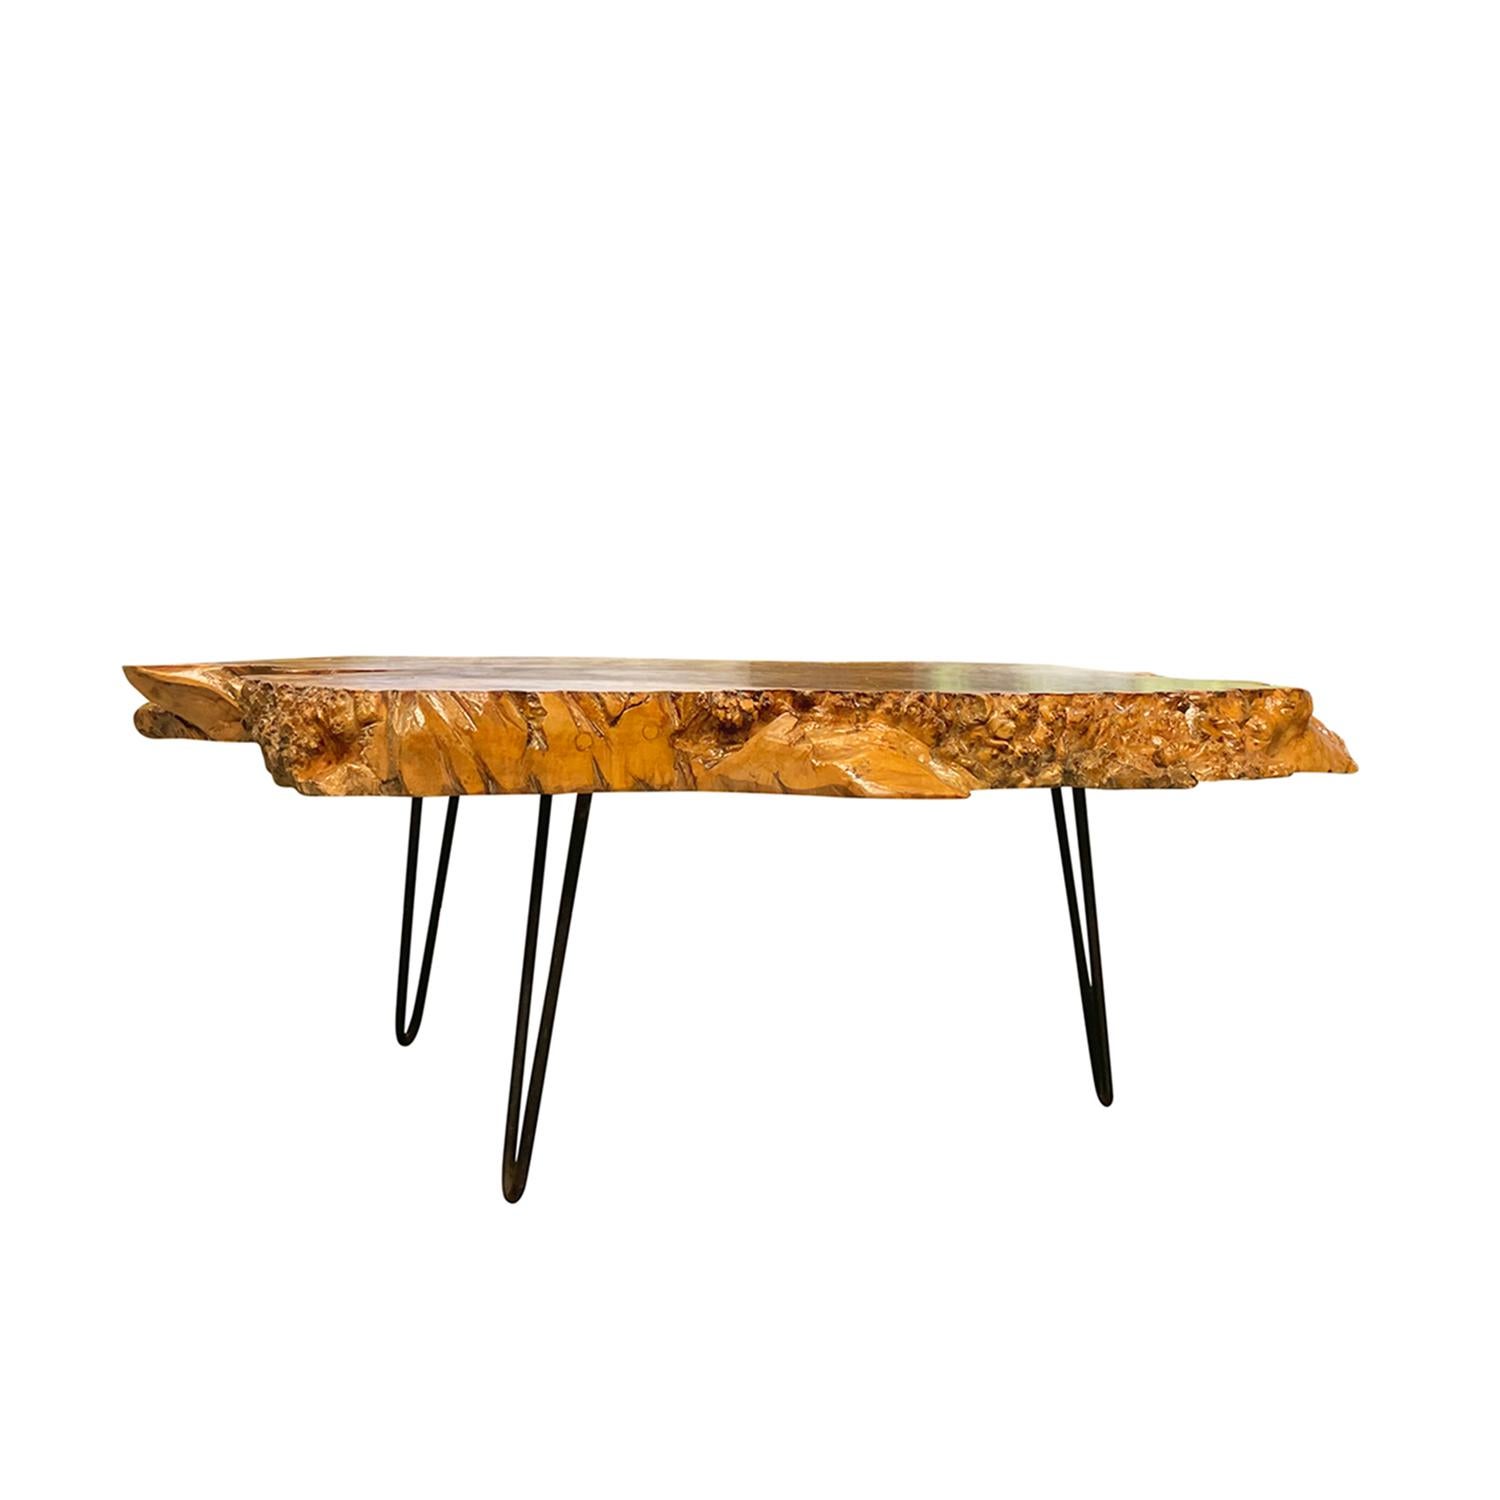 A sculptural, vintage Mid-Century modern American coffee, sofa table made of hand crafted polished Burlwood, in good condition. The detailed tree trunk table is particularized by grains which can be seen from all angles, standing on three metal